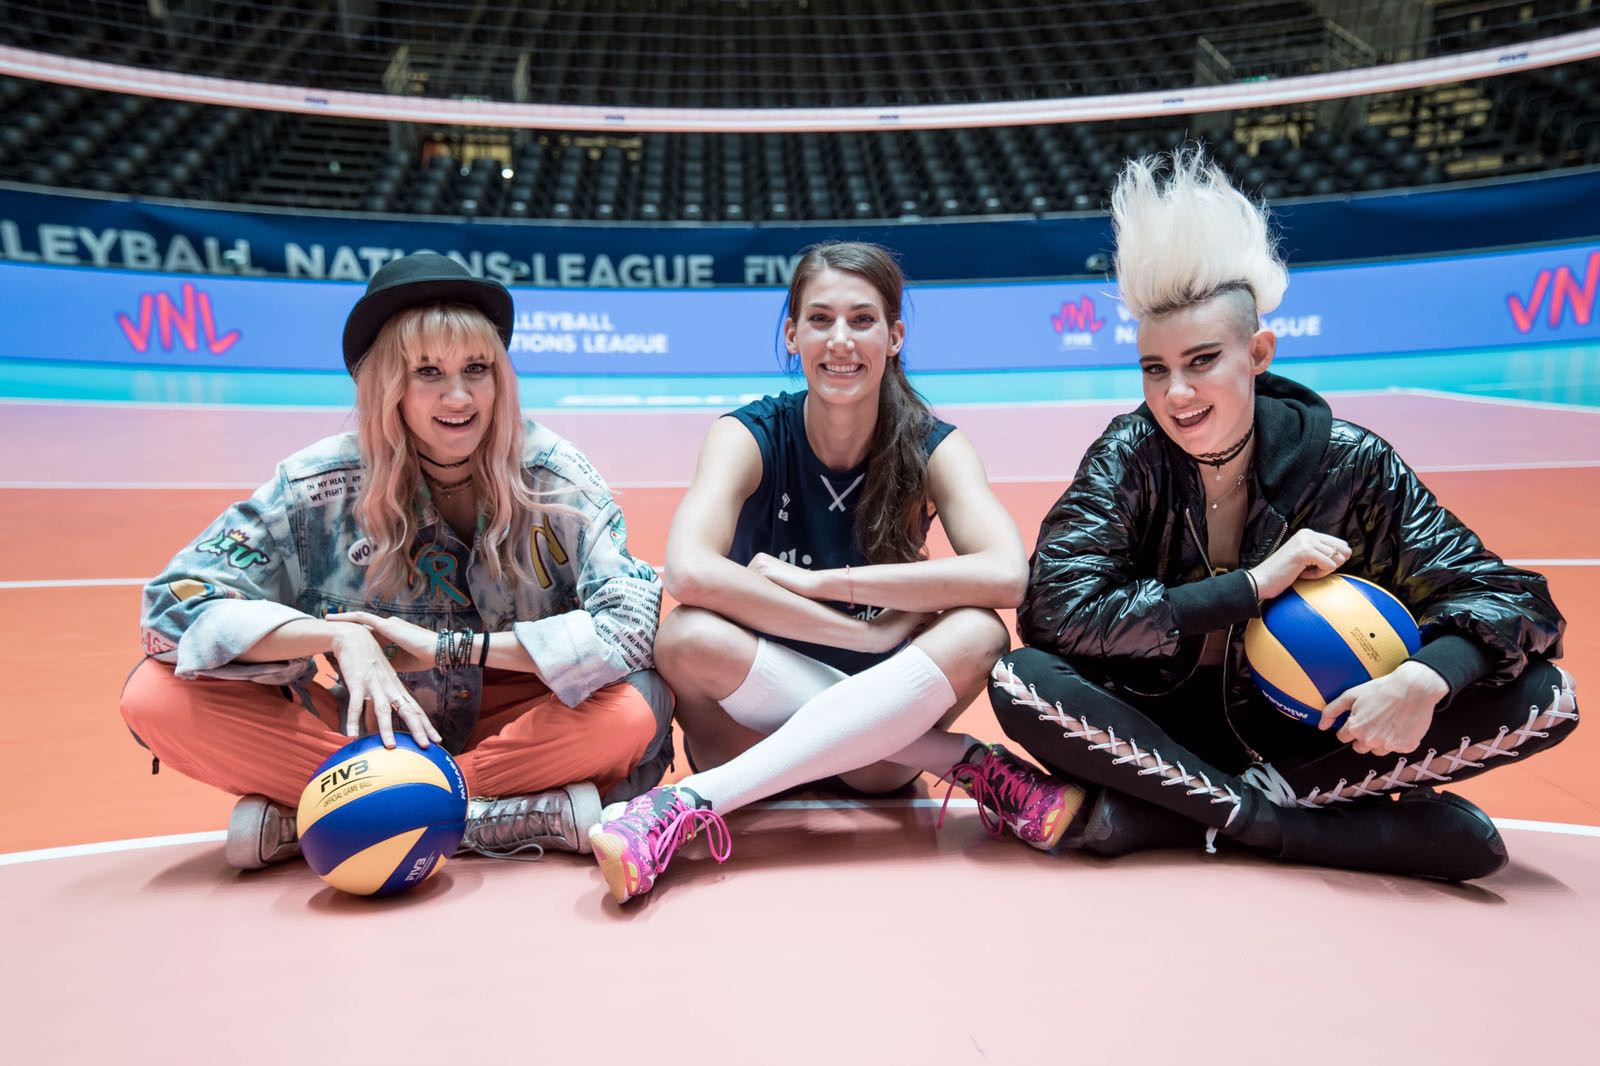  
NERVO spent time with Robin de Kruijf and The Netherlands team before the Women's Volleyball Nations League pool matches in Apeldoorn ©FIVB